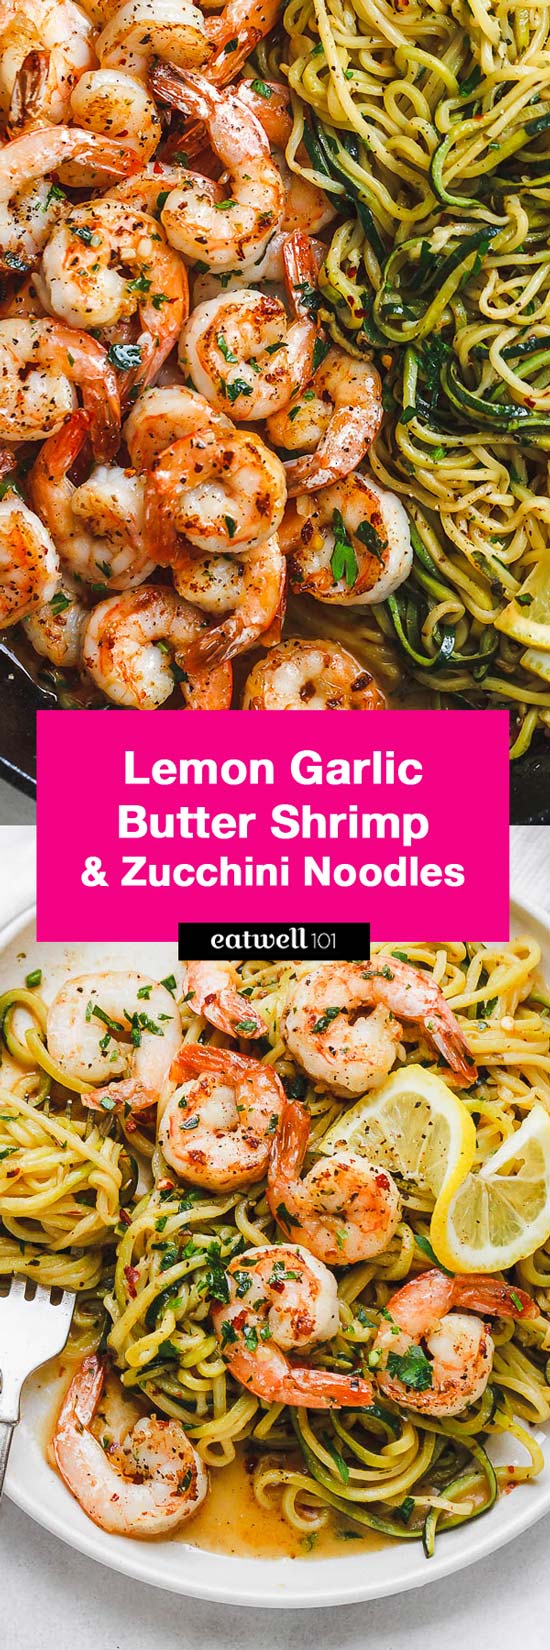 10-Minute Lemon Garlic Butter Shrimp with Zucchini Noodles -  #eatwell101 #recipe - This fantastic meal cooks in one skillet in just 10 minutes. #Shrimp #Zucchini #Noodles #Low-carb, #paleo, #keto, and #gluten-free.